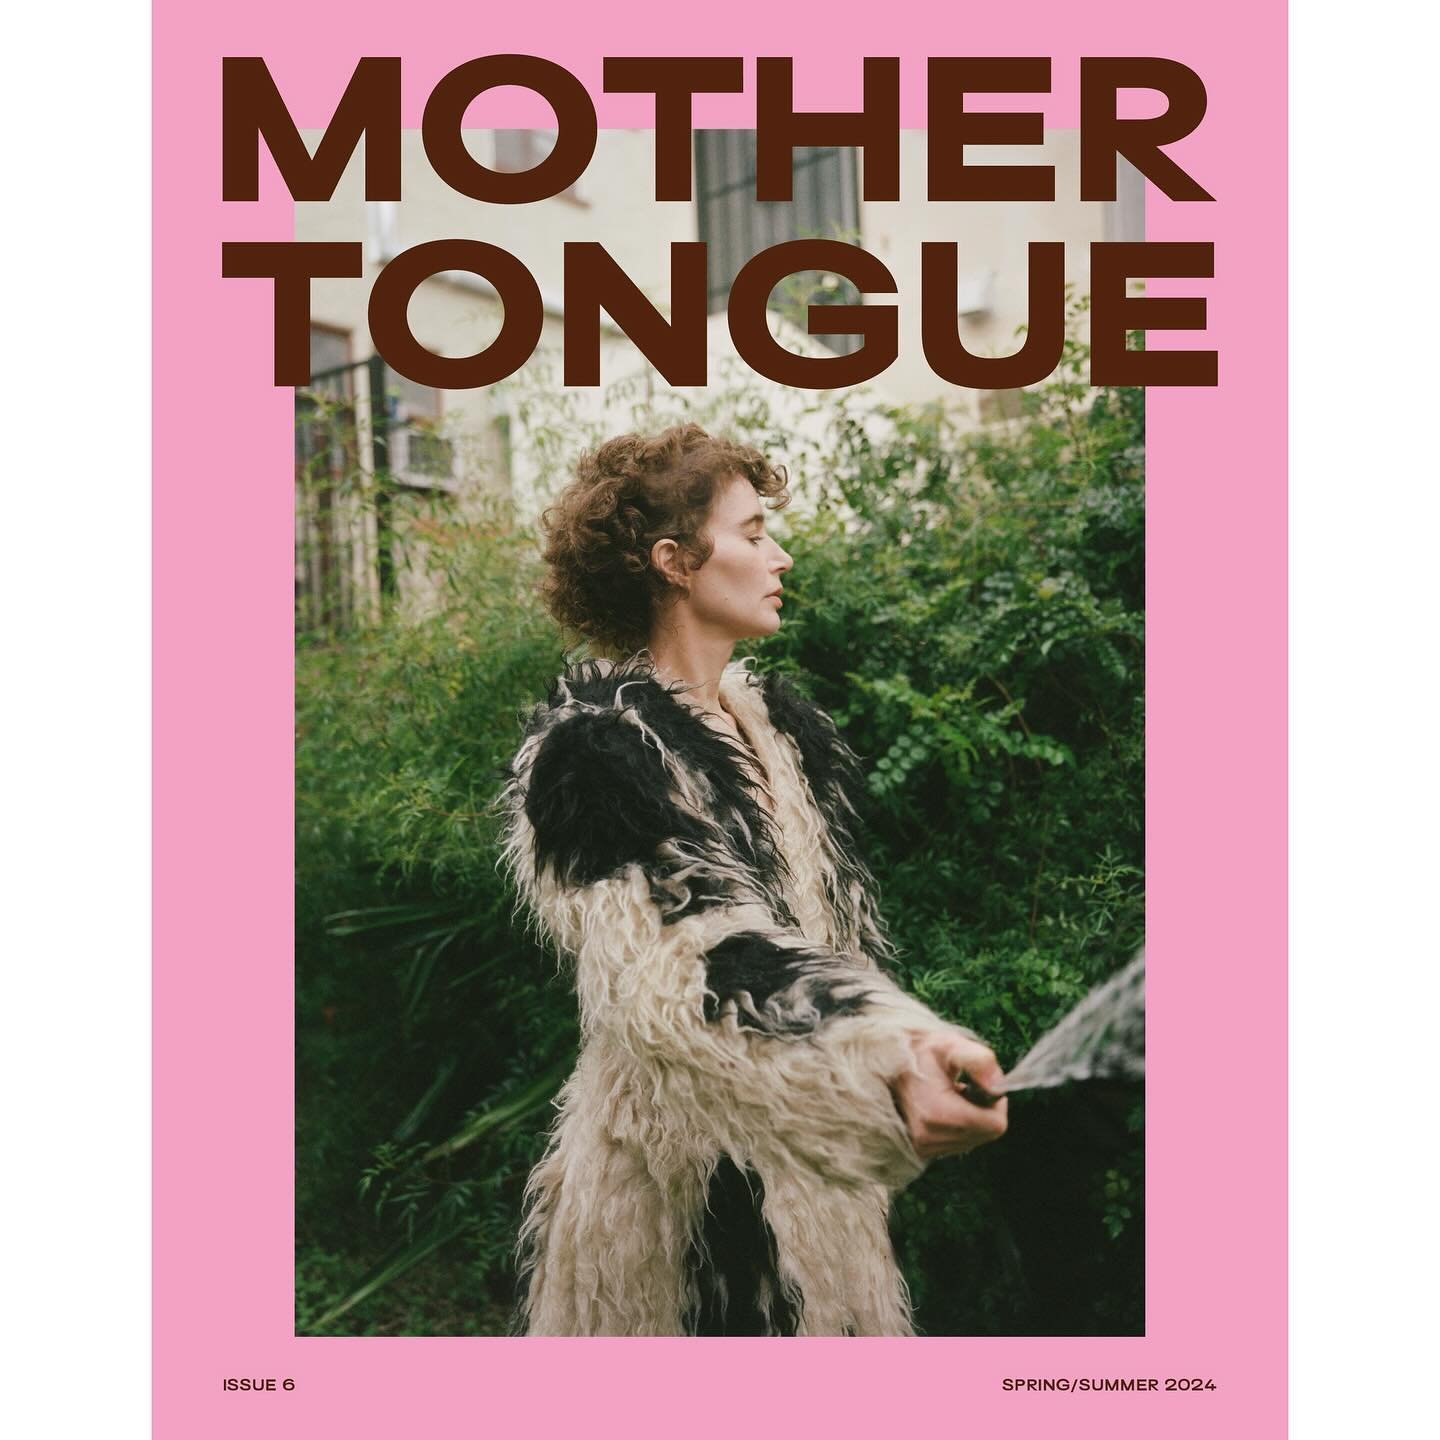 Celebrating modern motherhood through inclusive stories about art, sex, pop culture, politics, food and more! @mother_tongue_magazine #6 is out now with the lovely #MirandaJuly on the cover and it is also available to our US base!